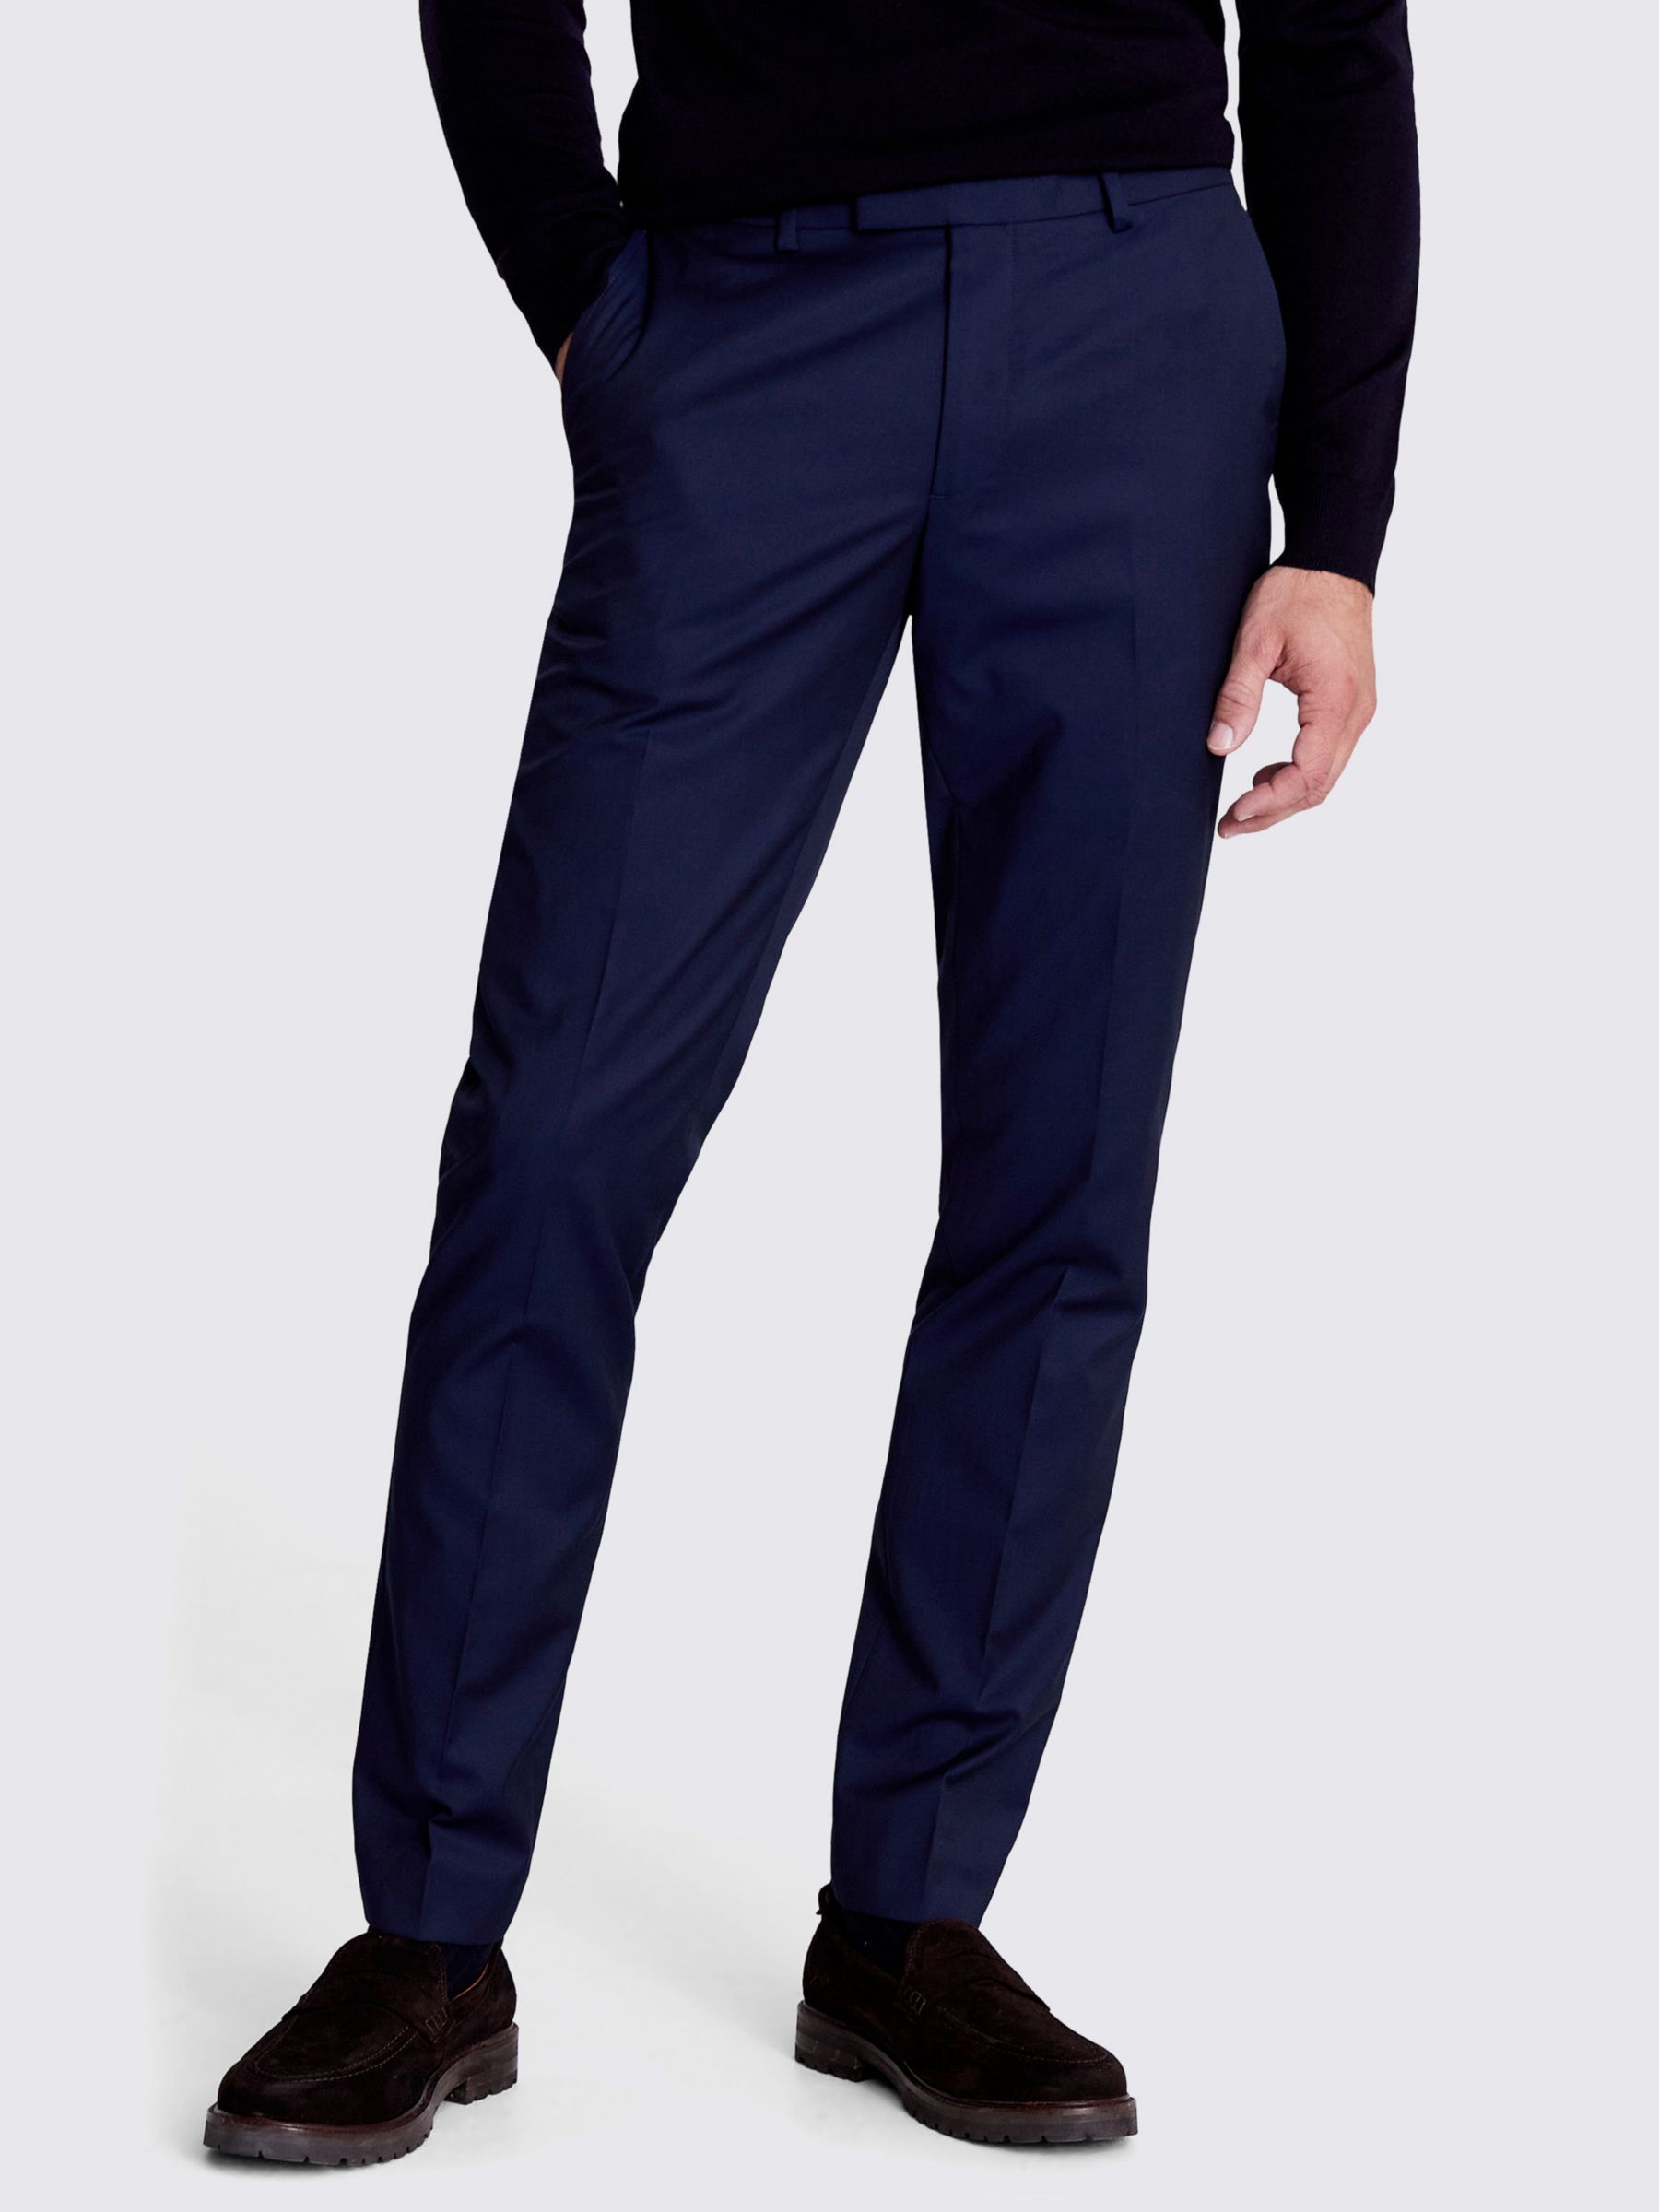 Moss Slim Fit Ink Stretch Trouser, Ink at John Lewis & Partners